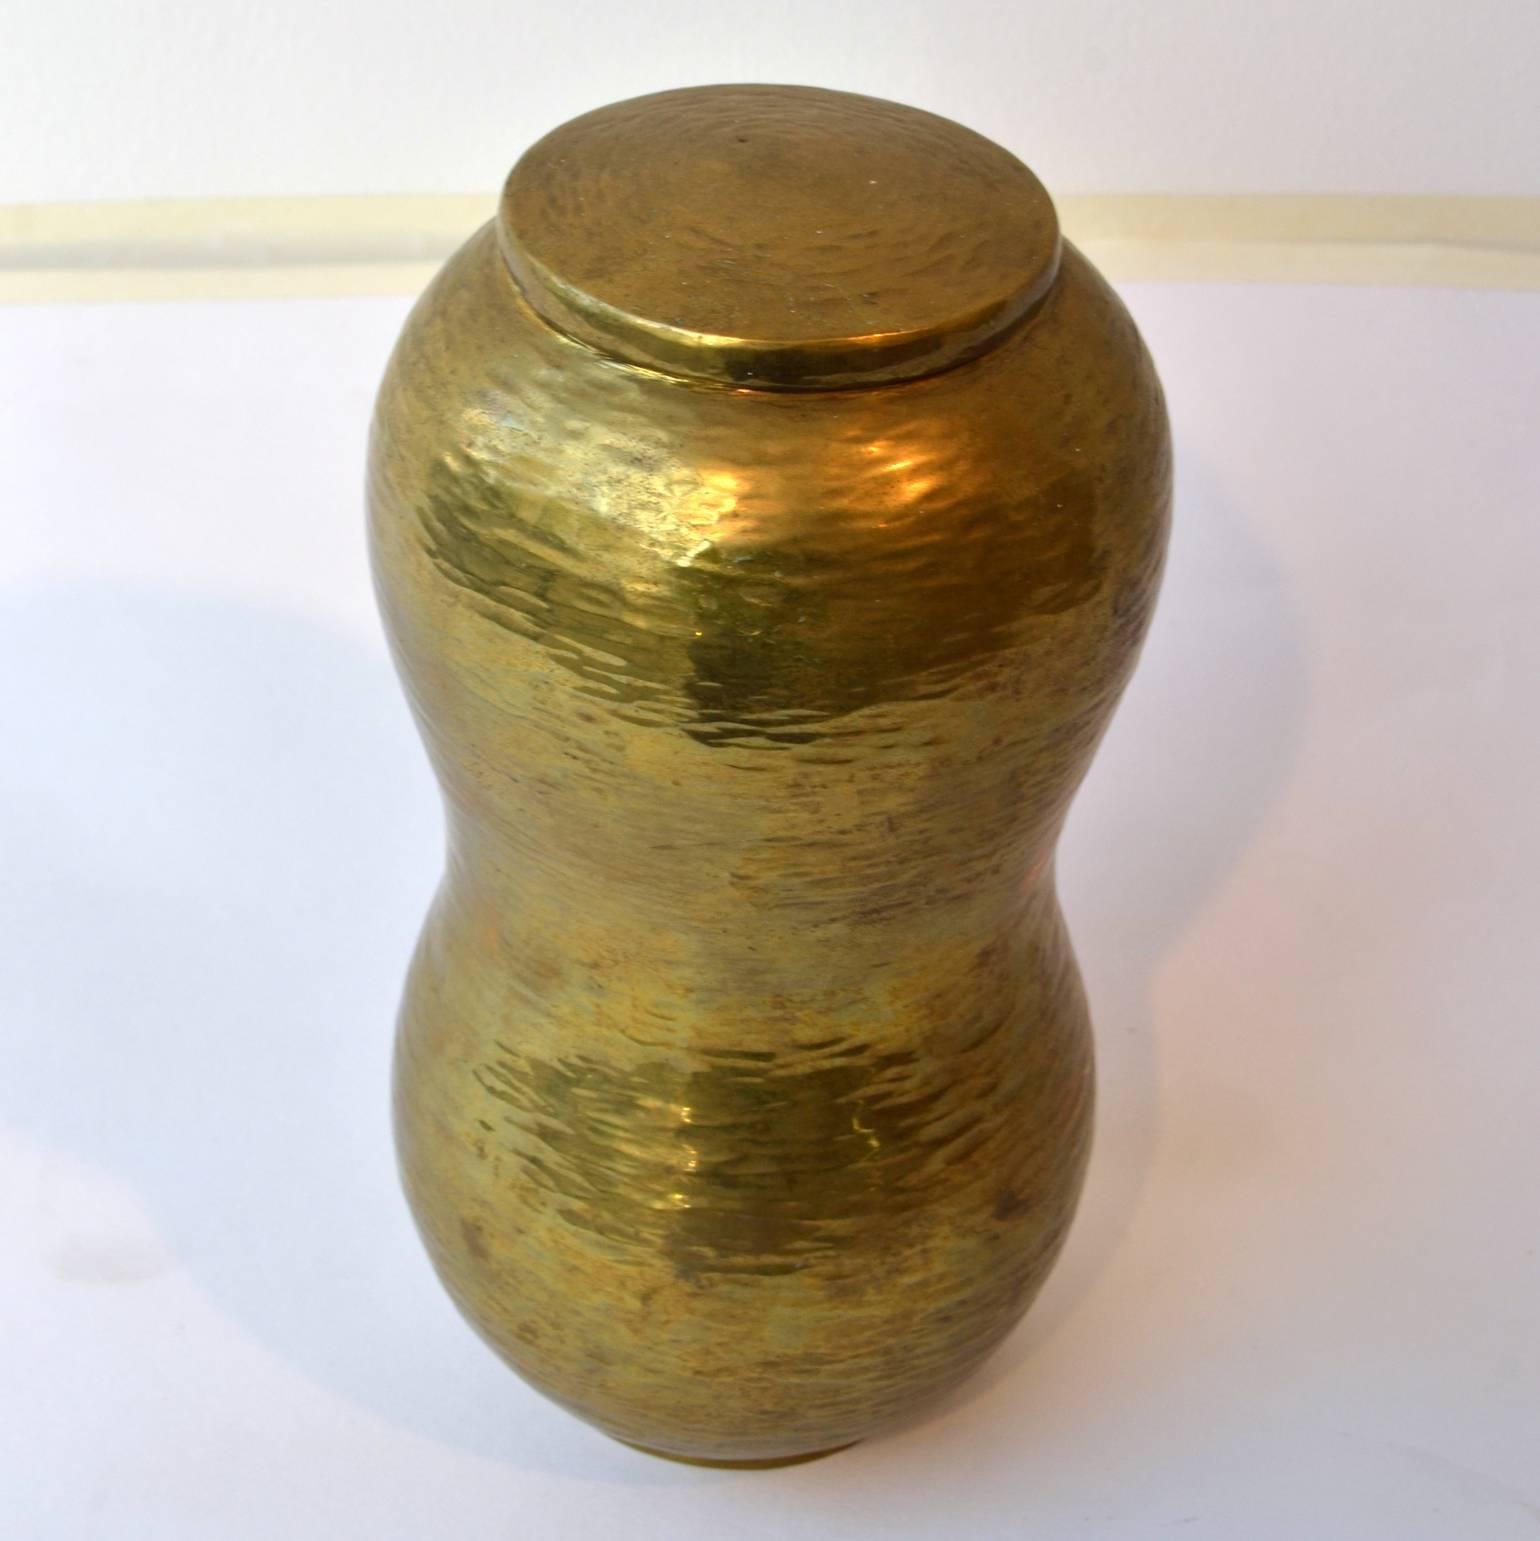 Tactile hand driven brass vessel or container with lid signed Franz J. Peters Stolberg RH, Peters, 1913-1977. In this handcrafted container the traces of his hand driven tools are visible and decorative. Peters was a blacksmith and sculptor was a